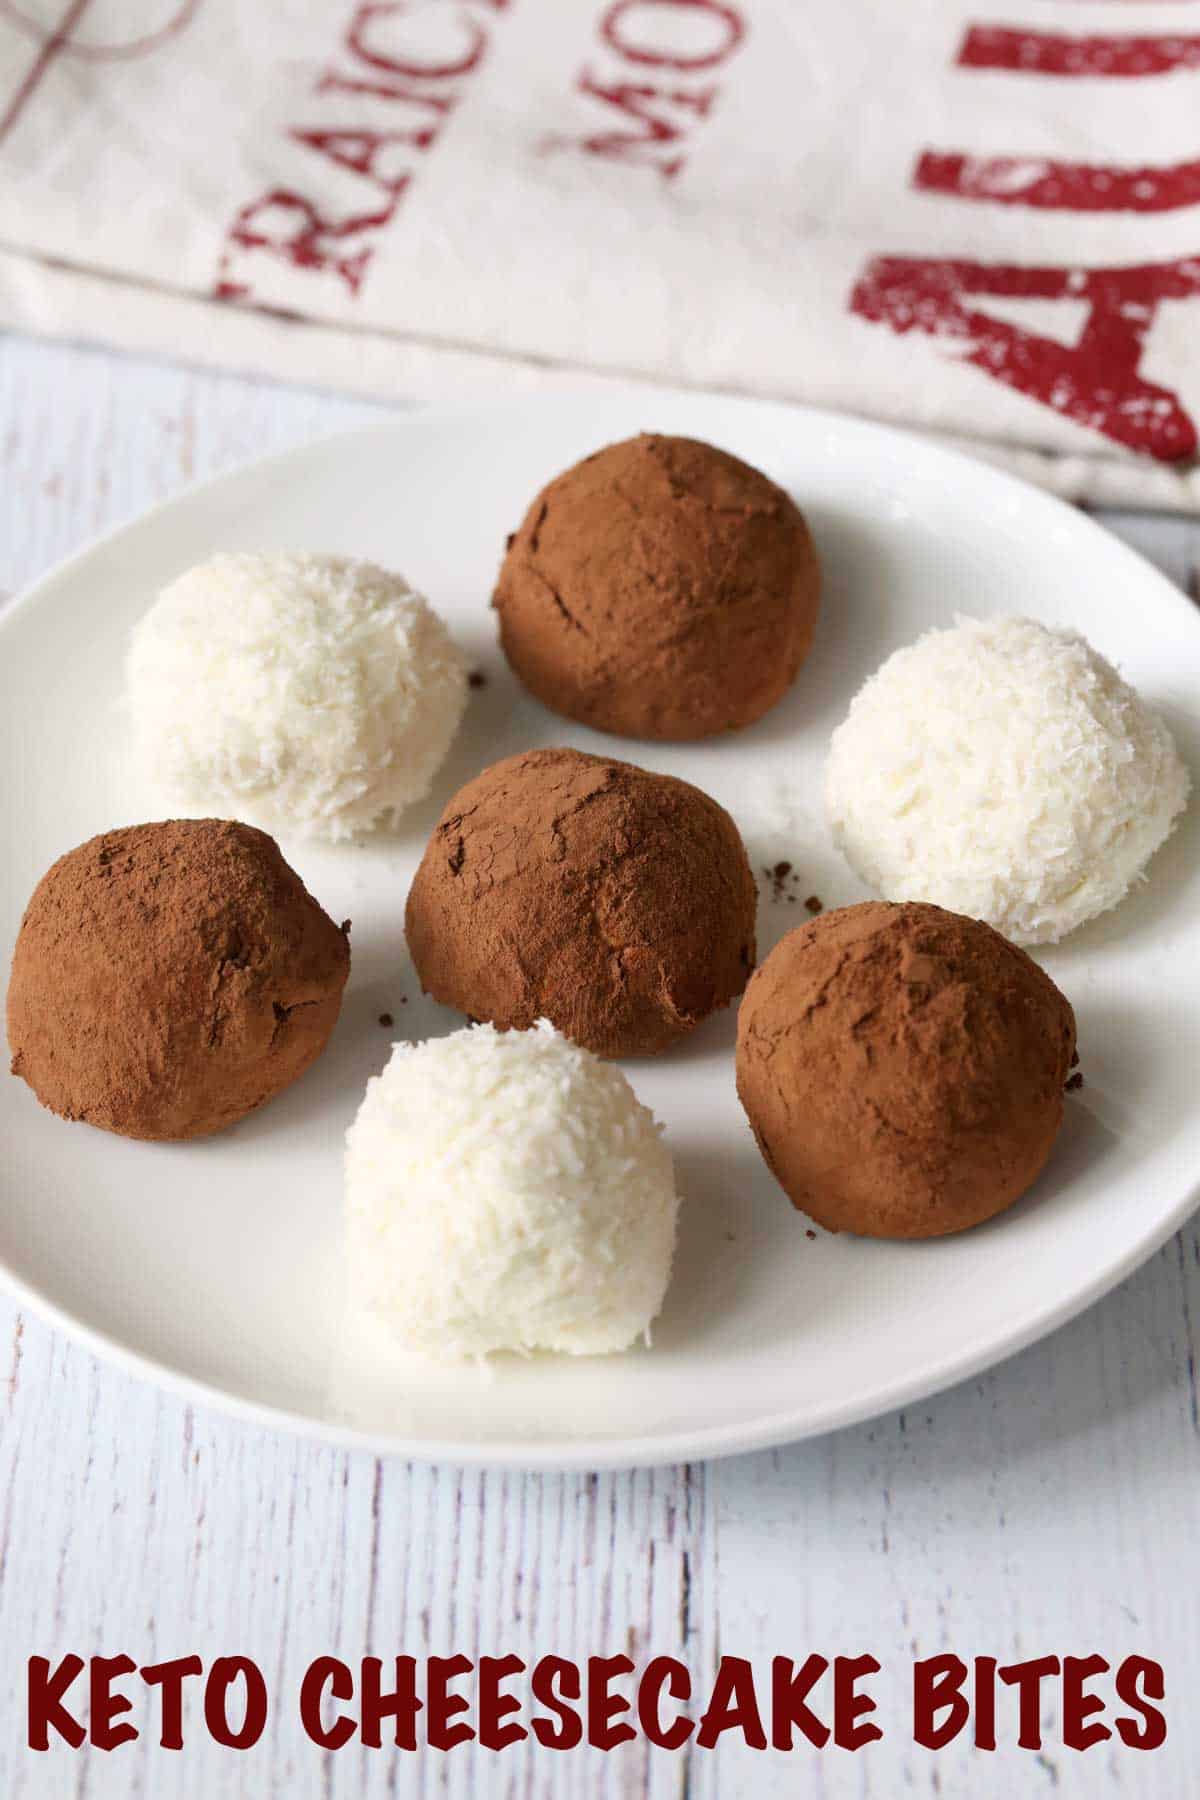 Keto cheesecake bites coated with cocoa powder and shredded coconut.